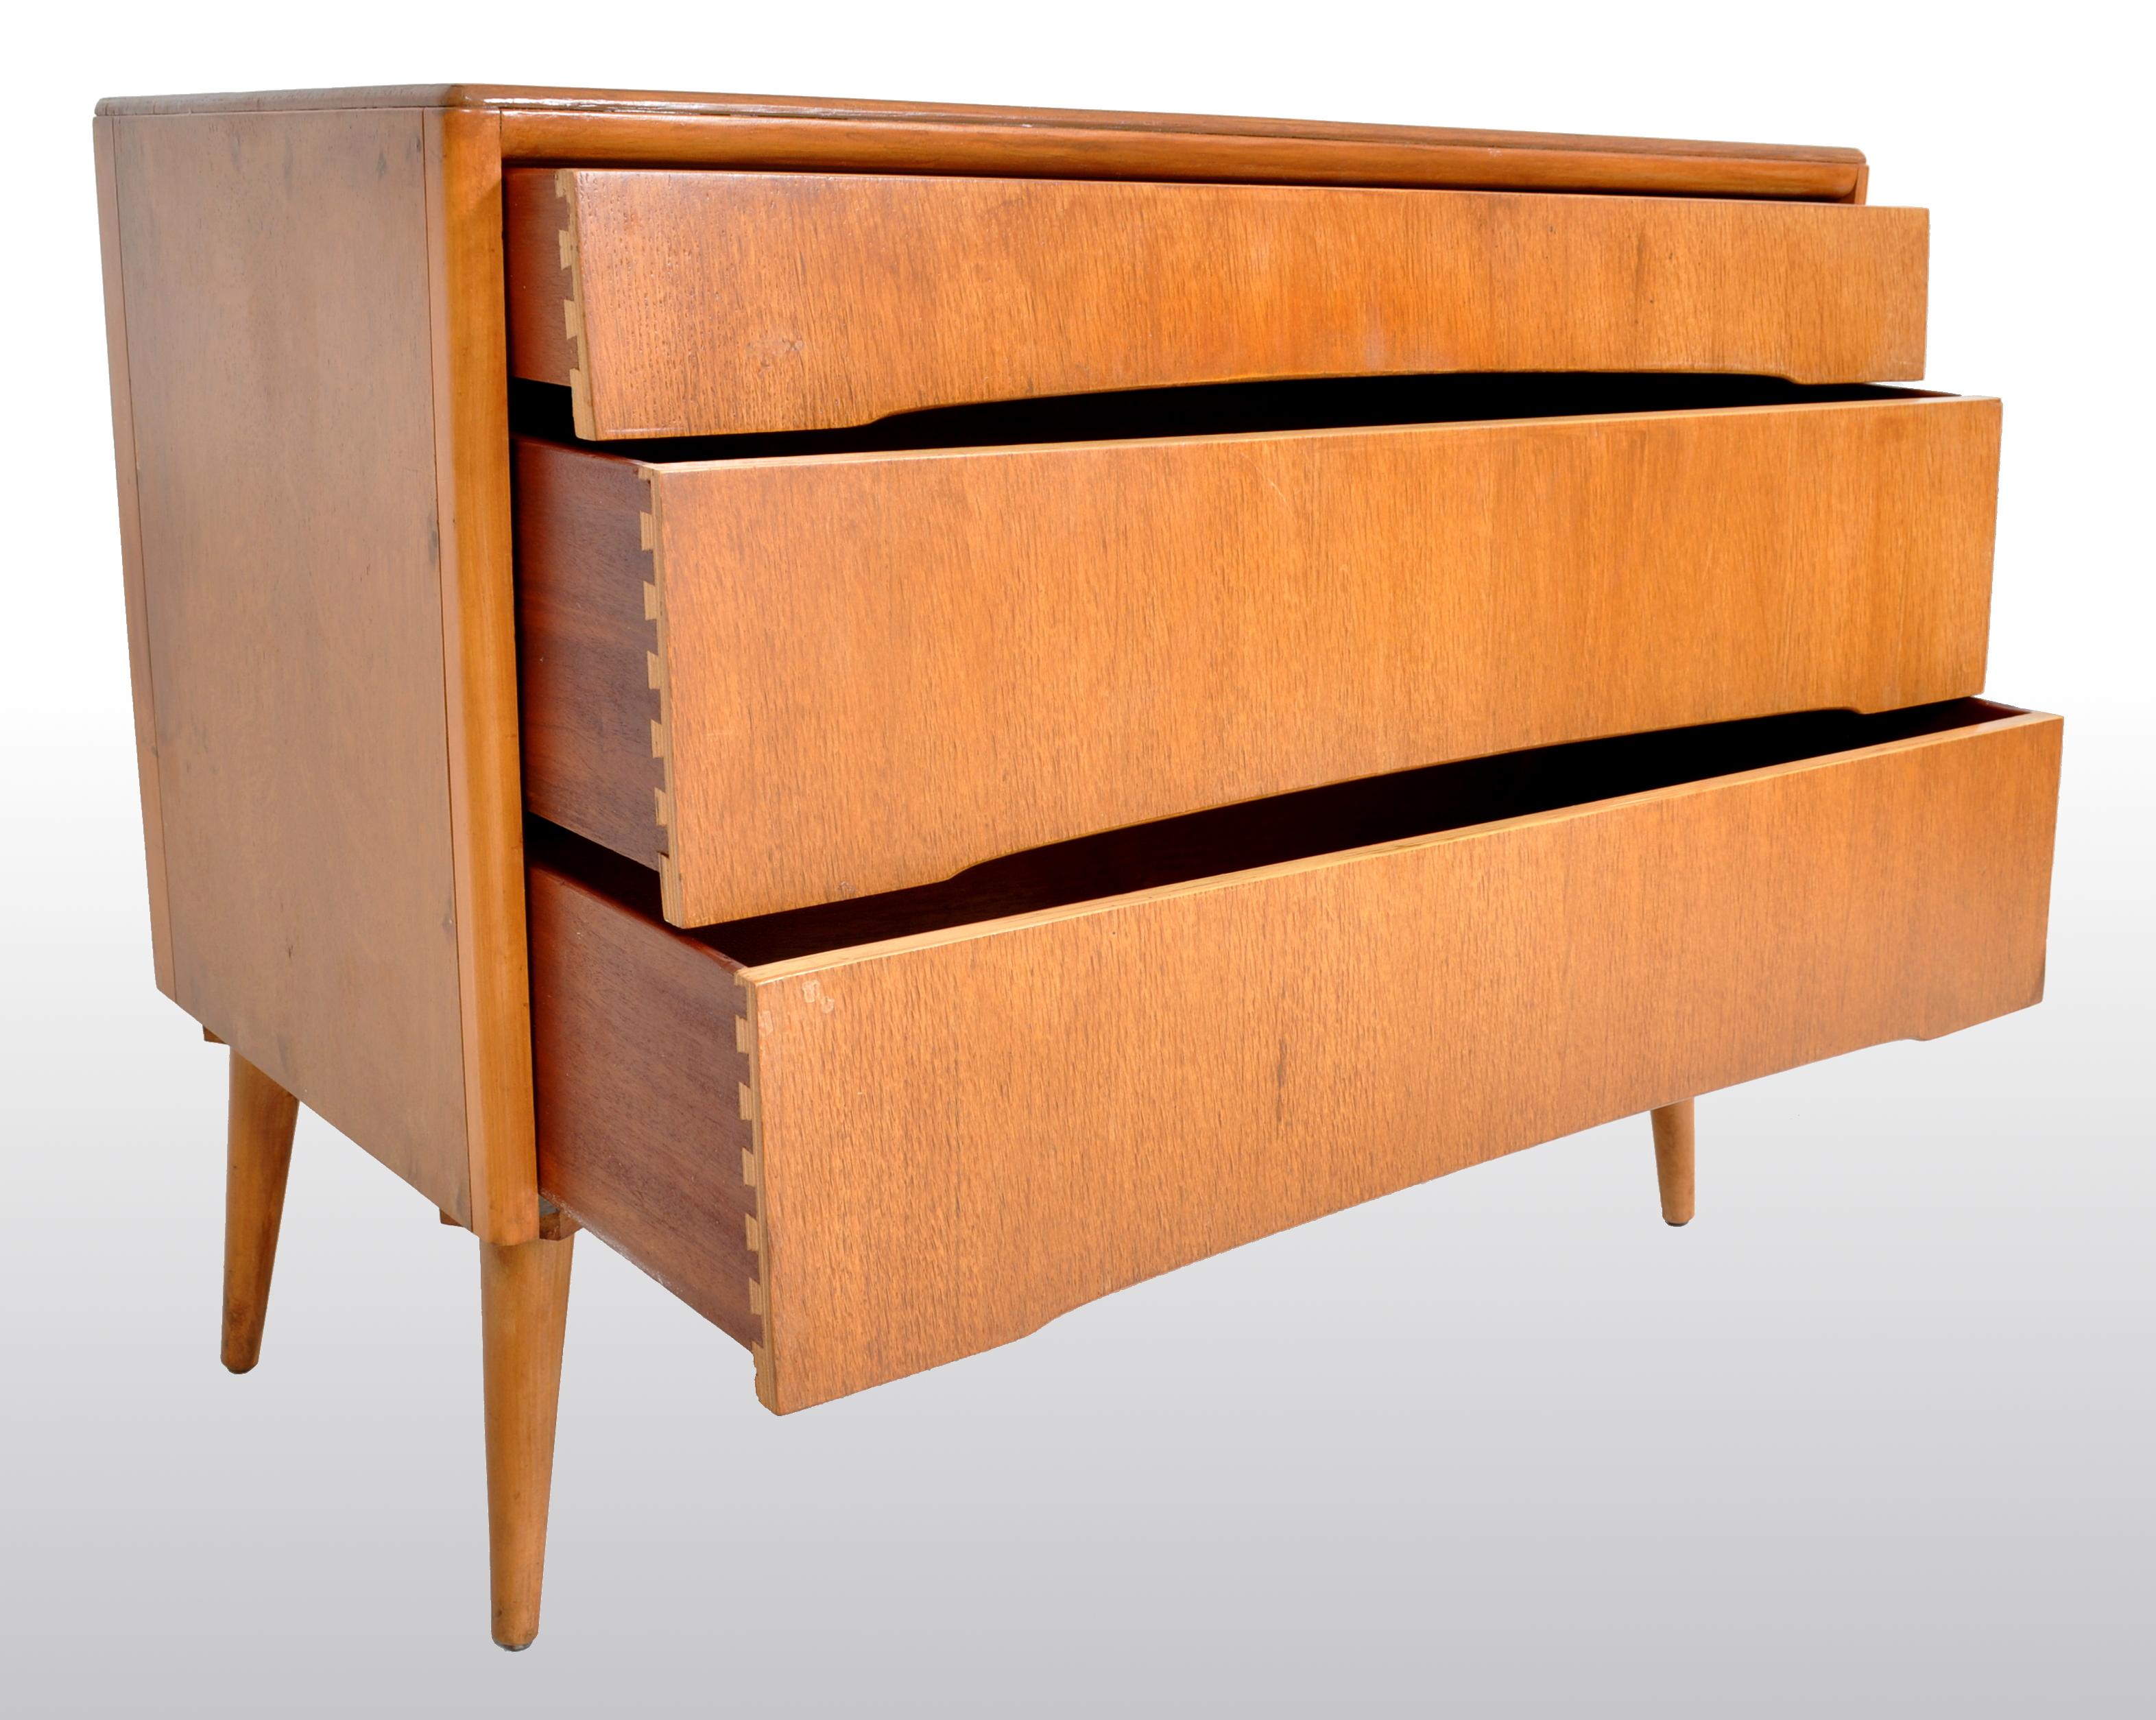 20th Century Mid-Century Modern Danish Style Chest of Drawers by Avalon Yatton, 1960s